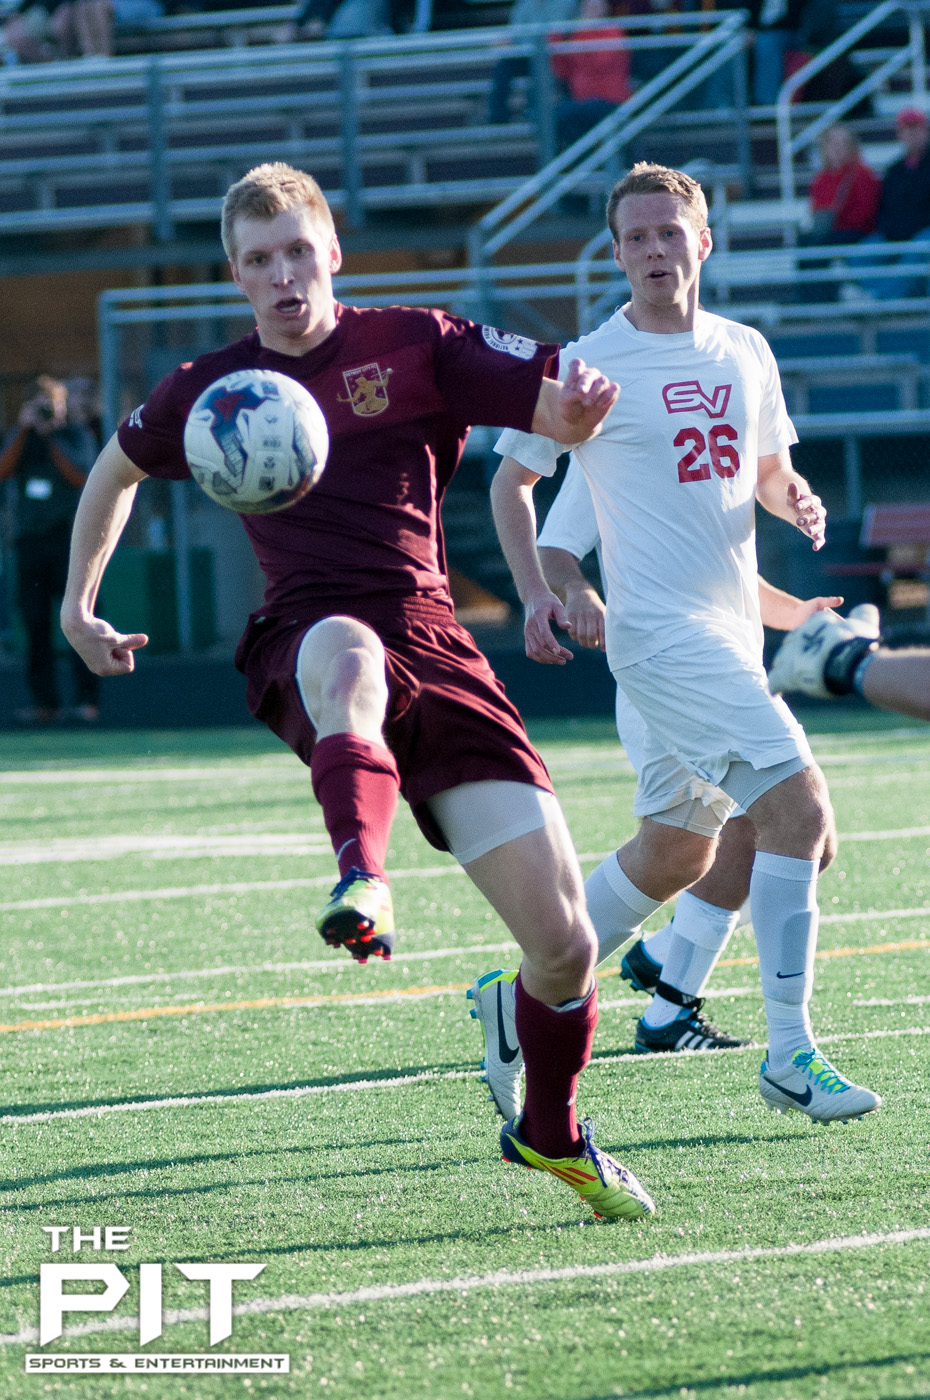 Detroit City FC Zach Meyers (15) fights for ball control against an opposing Saginaw Valley Forward at a scrimmage match on April 19, 2014 at Hurley Field. Brian Quintos / The Pit: SE